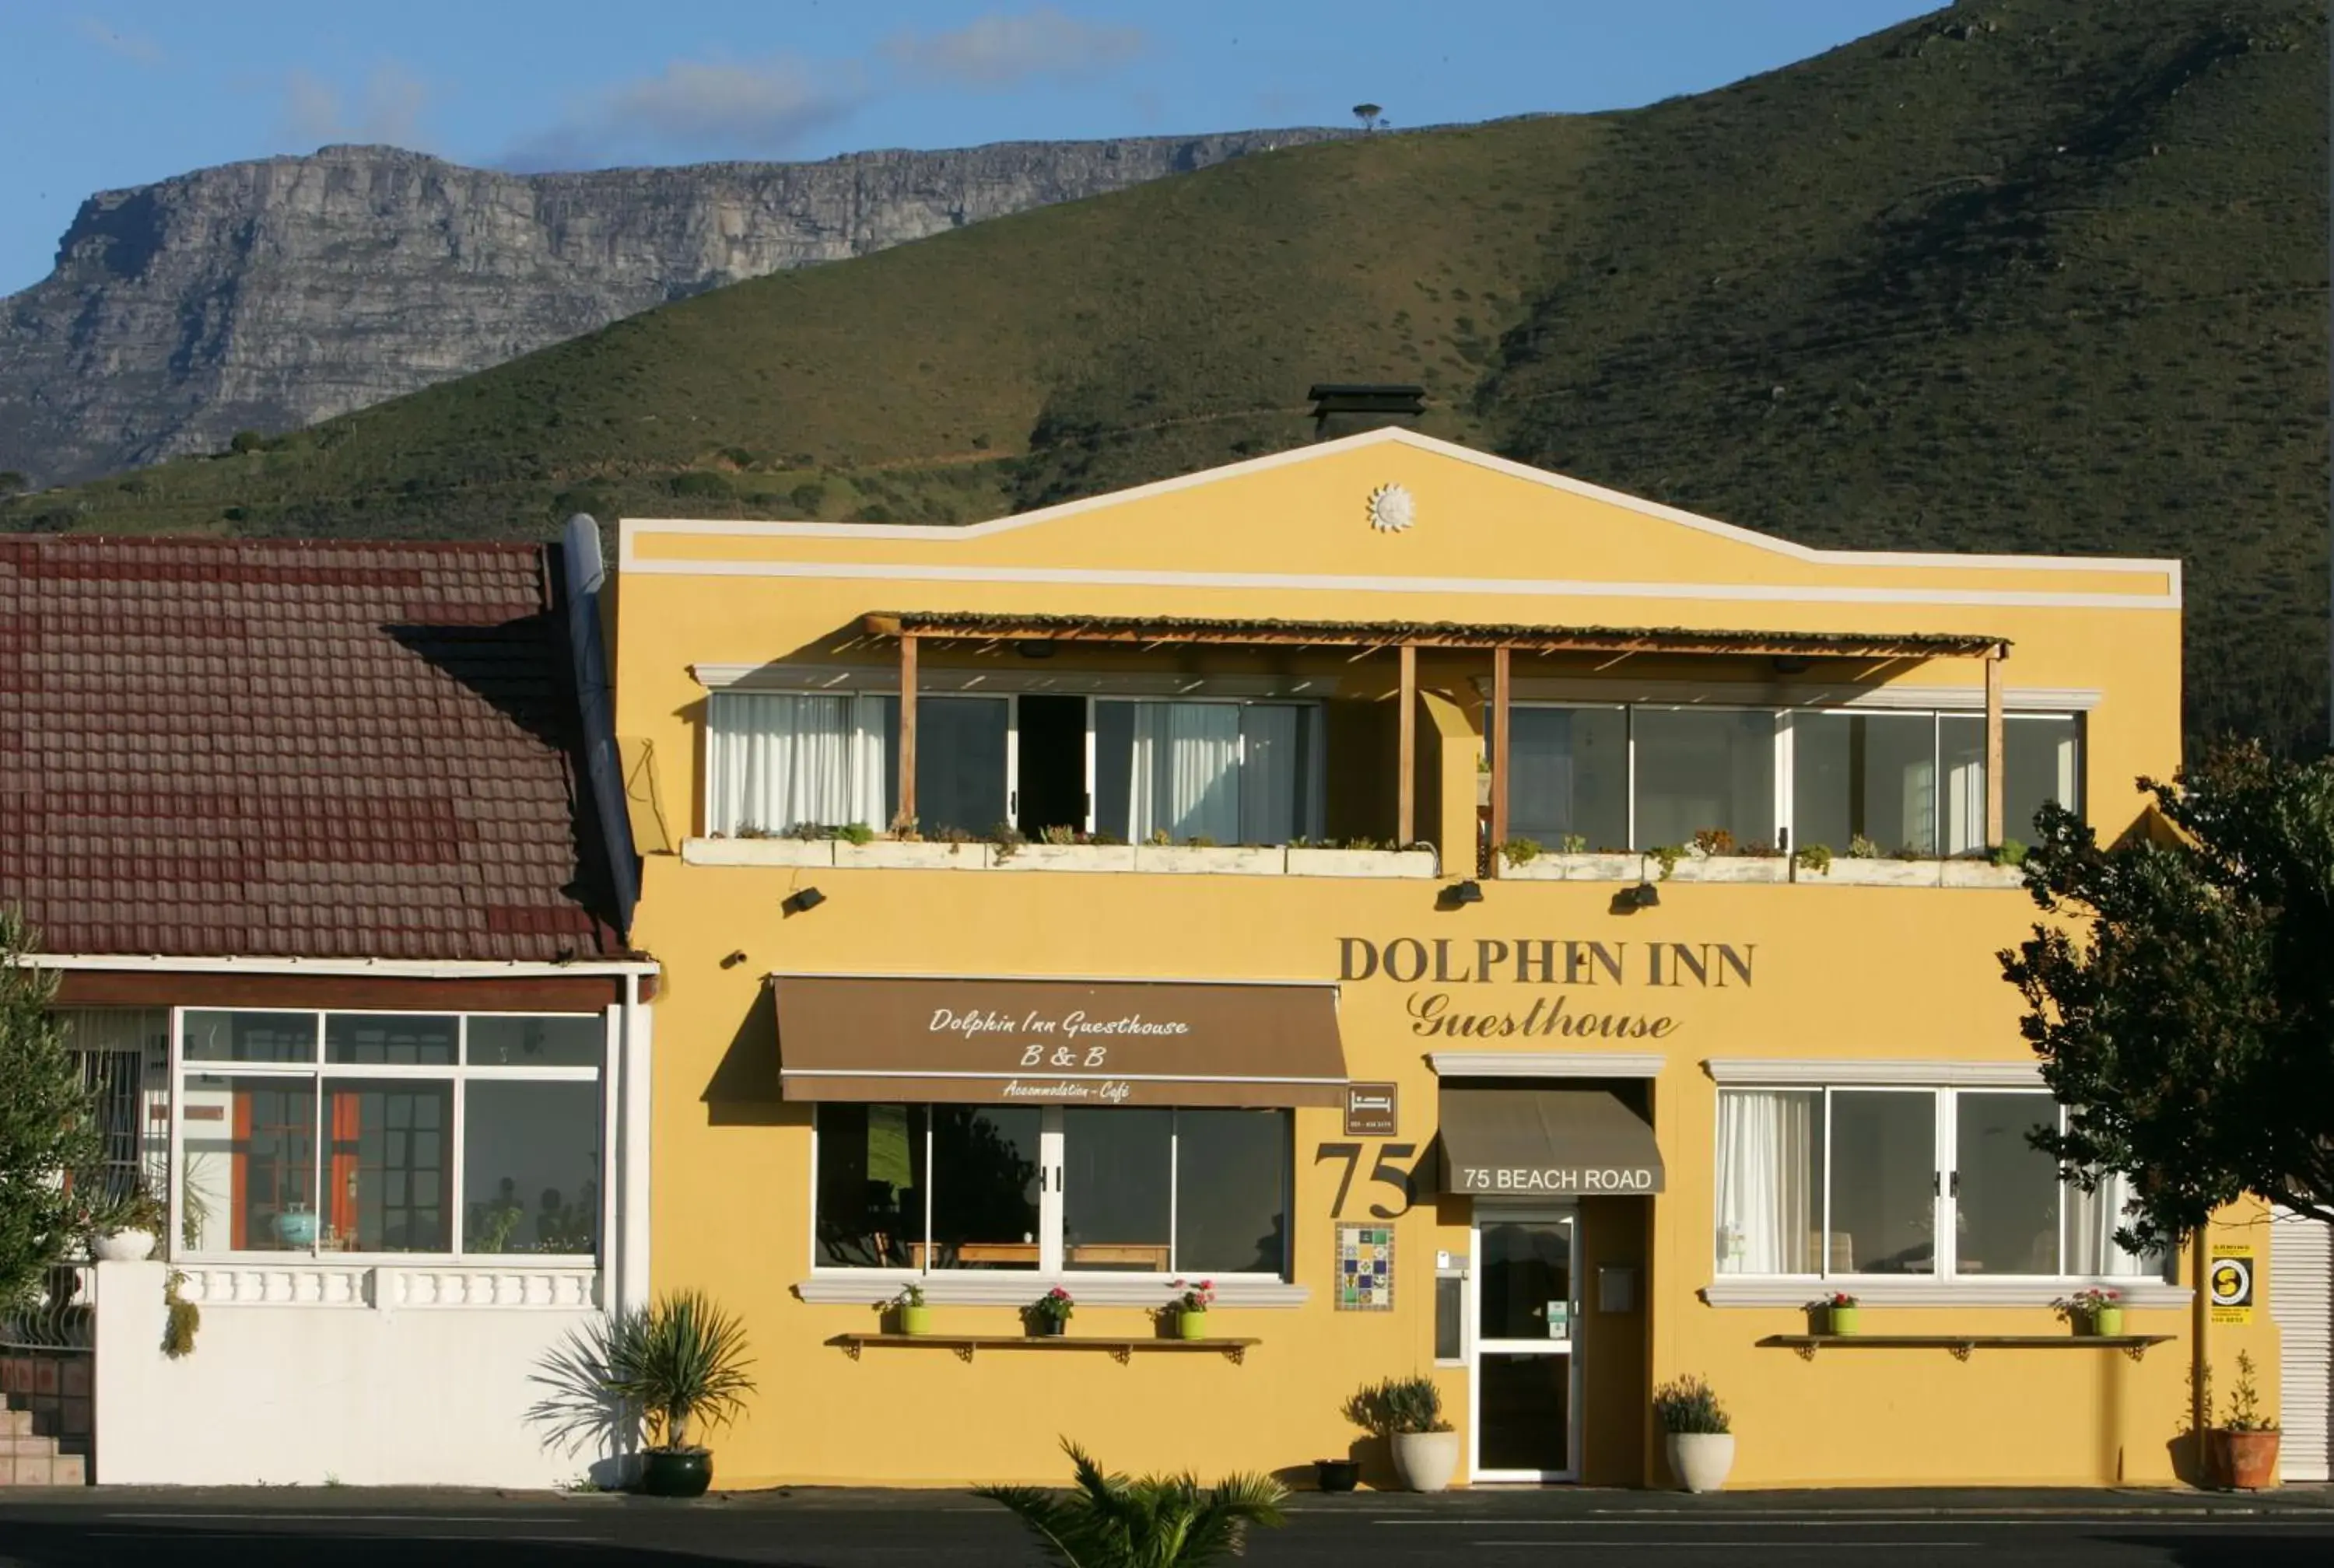 Property Building in Dolphin Inn Guesthouse